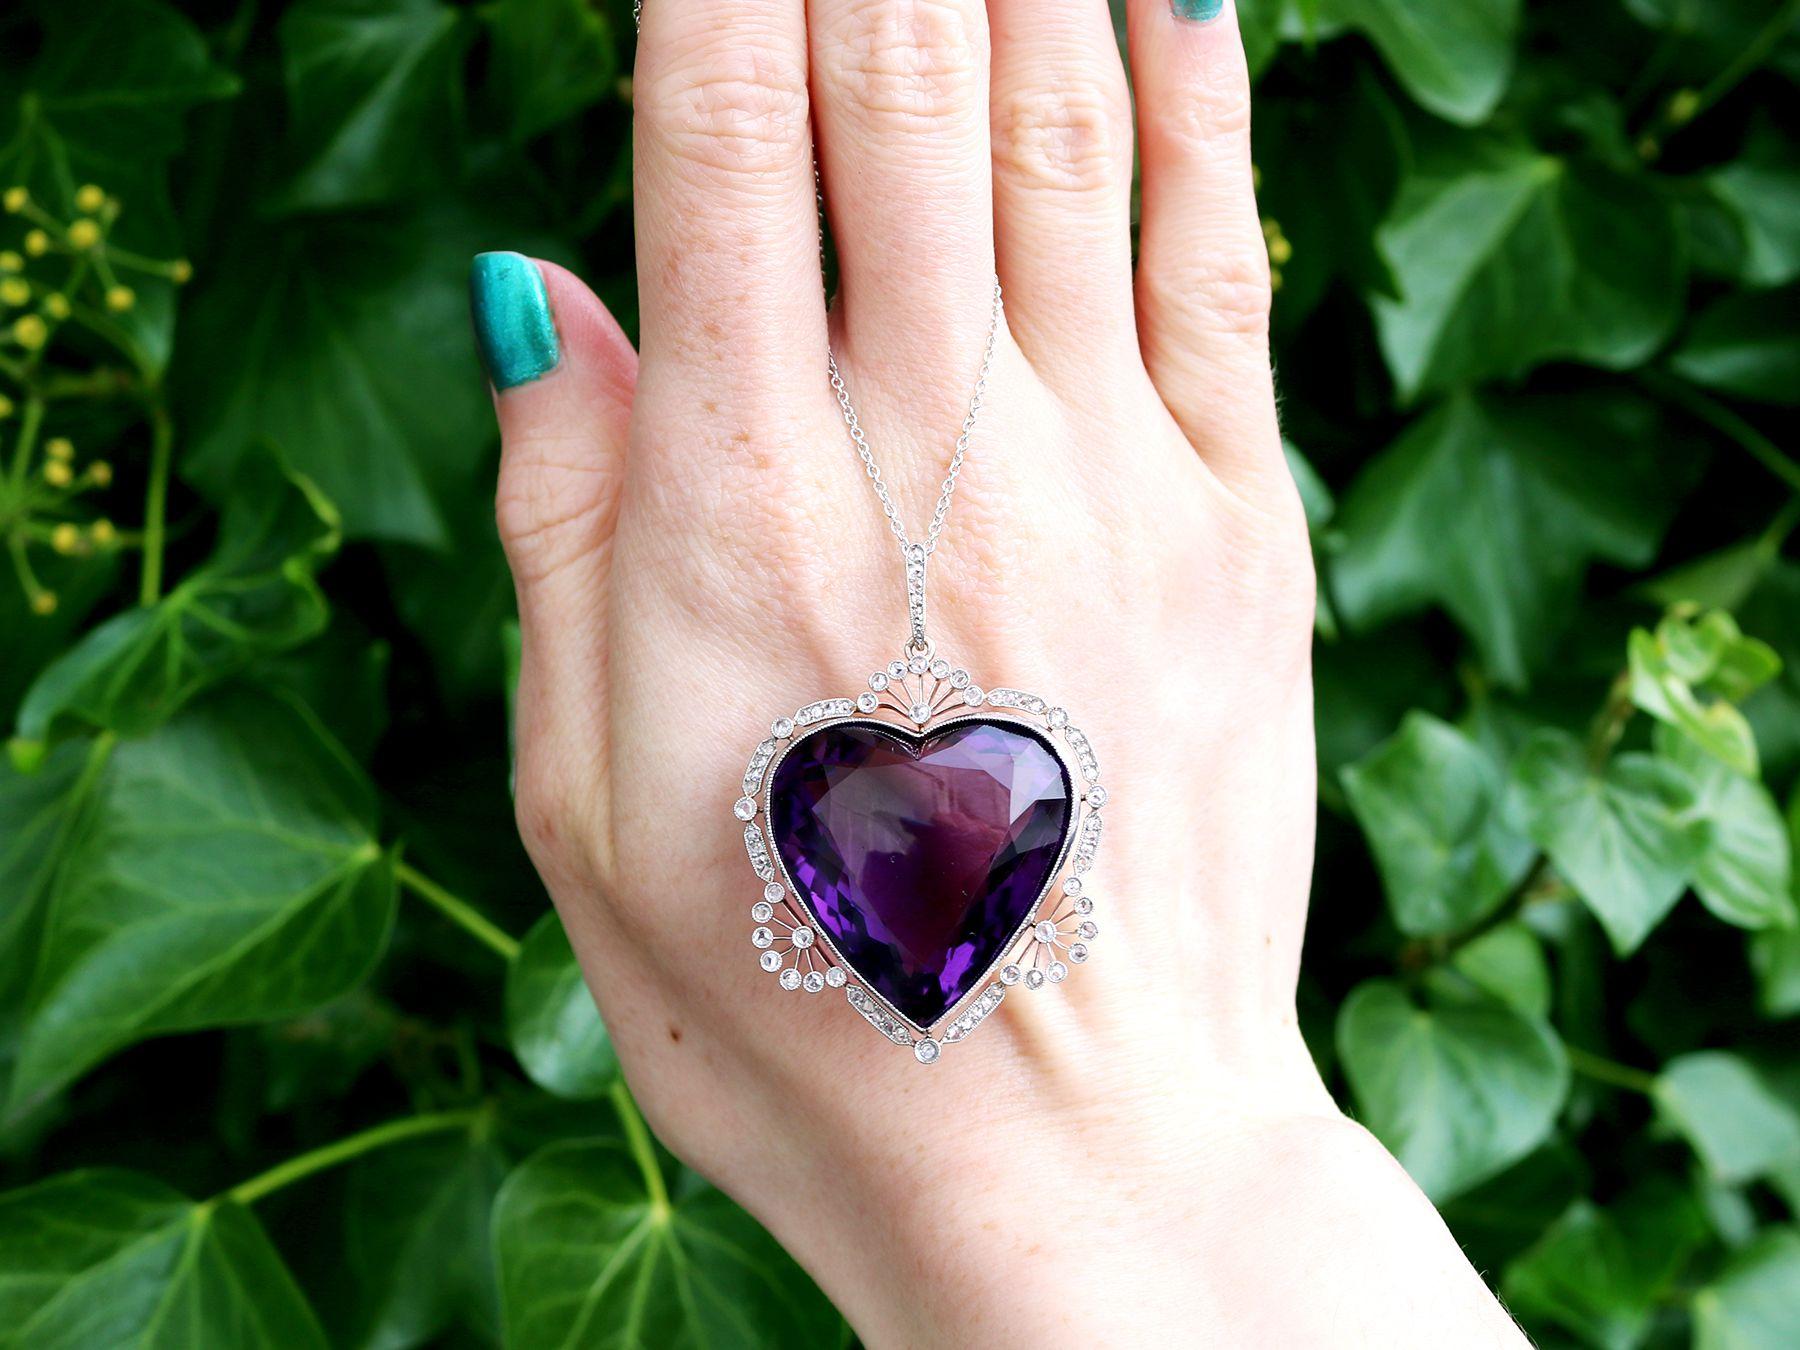 A magnificent, fine and impressive 45.27 carat amethyst and 0.95 carat diamond, 18 karat yellow gold and platinum set heart pendant; part of our diverse antique jewelry and estate jewelry collections. 

This magnificent, fine and impressive amethyst